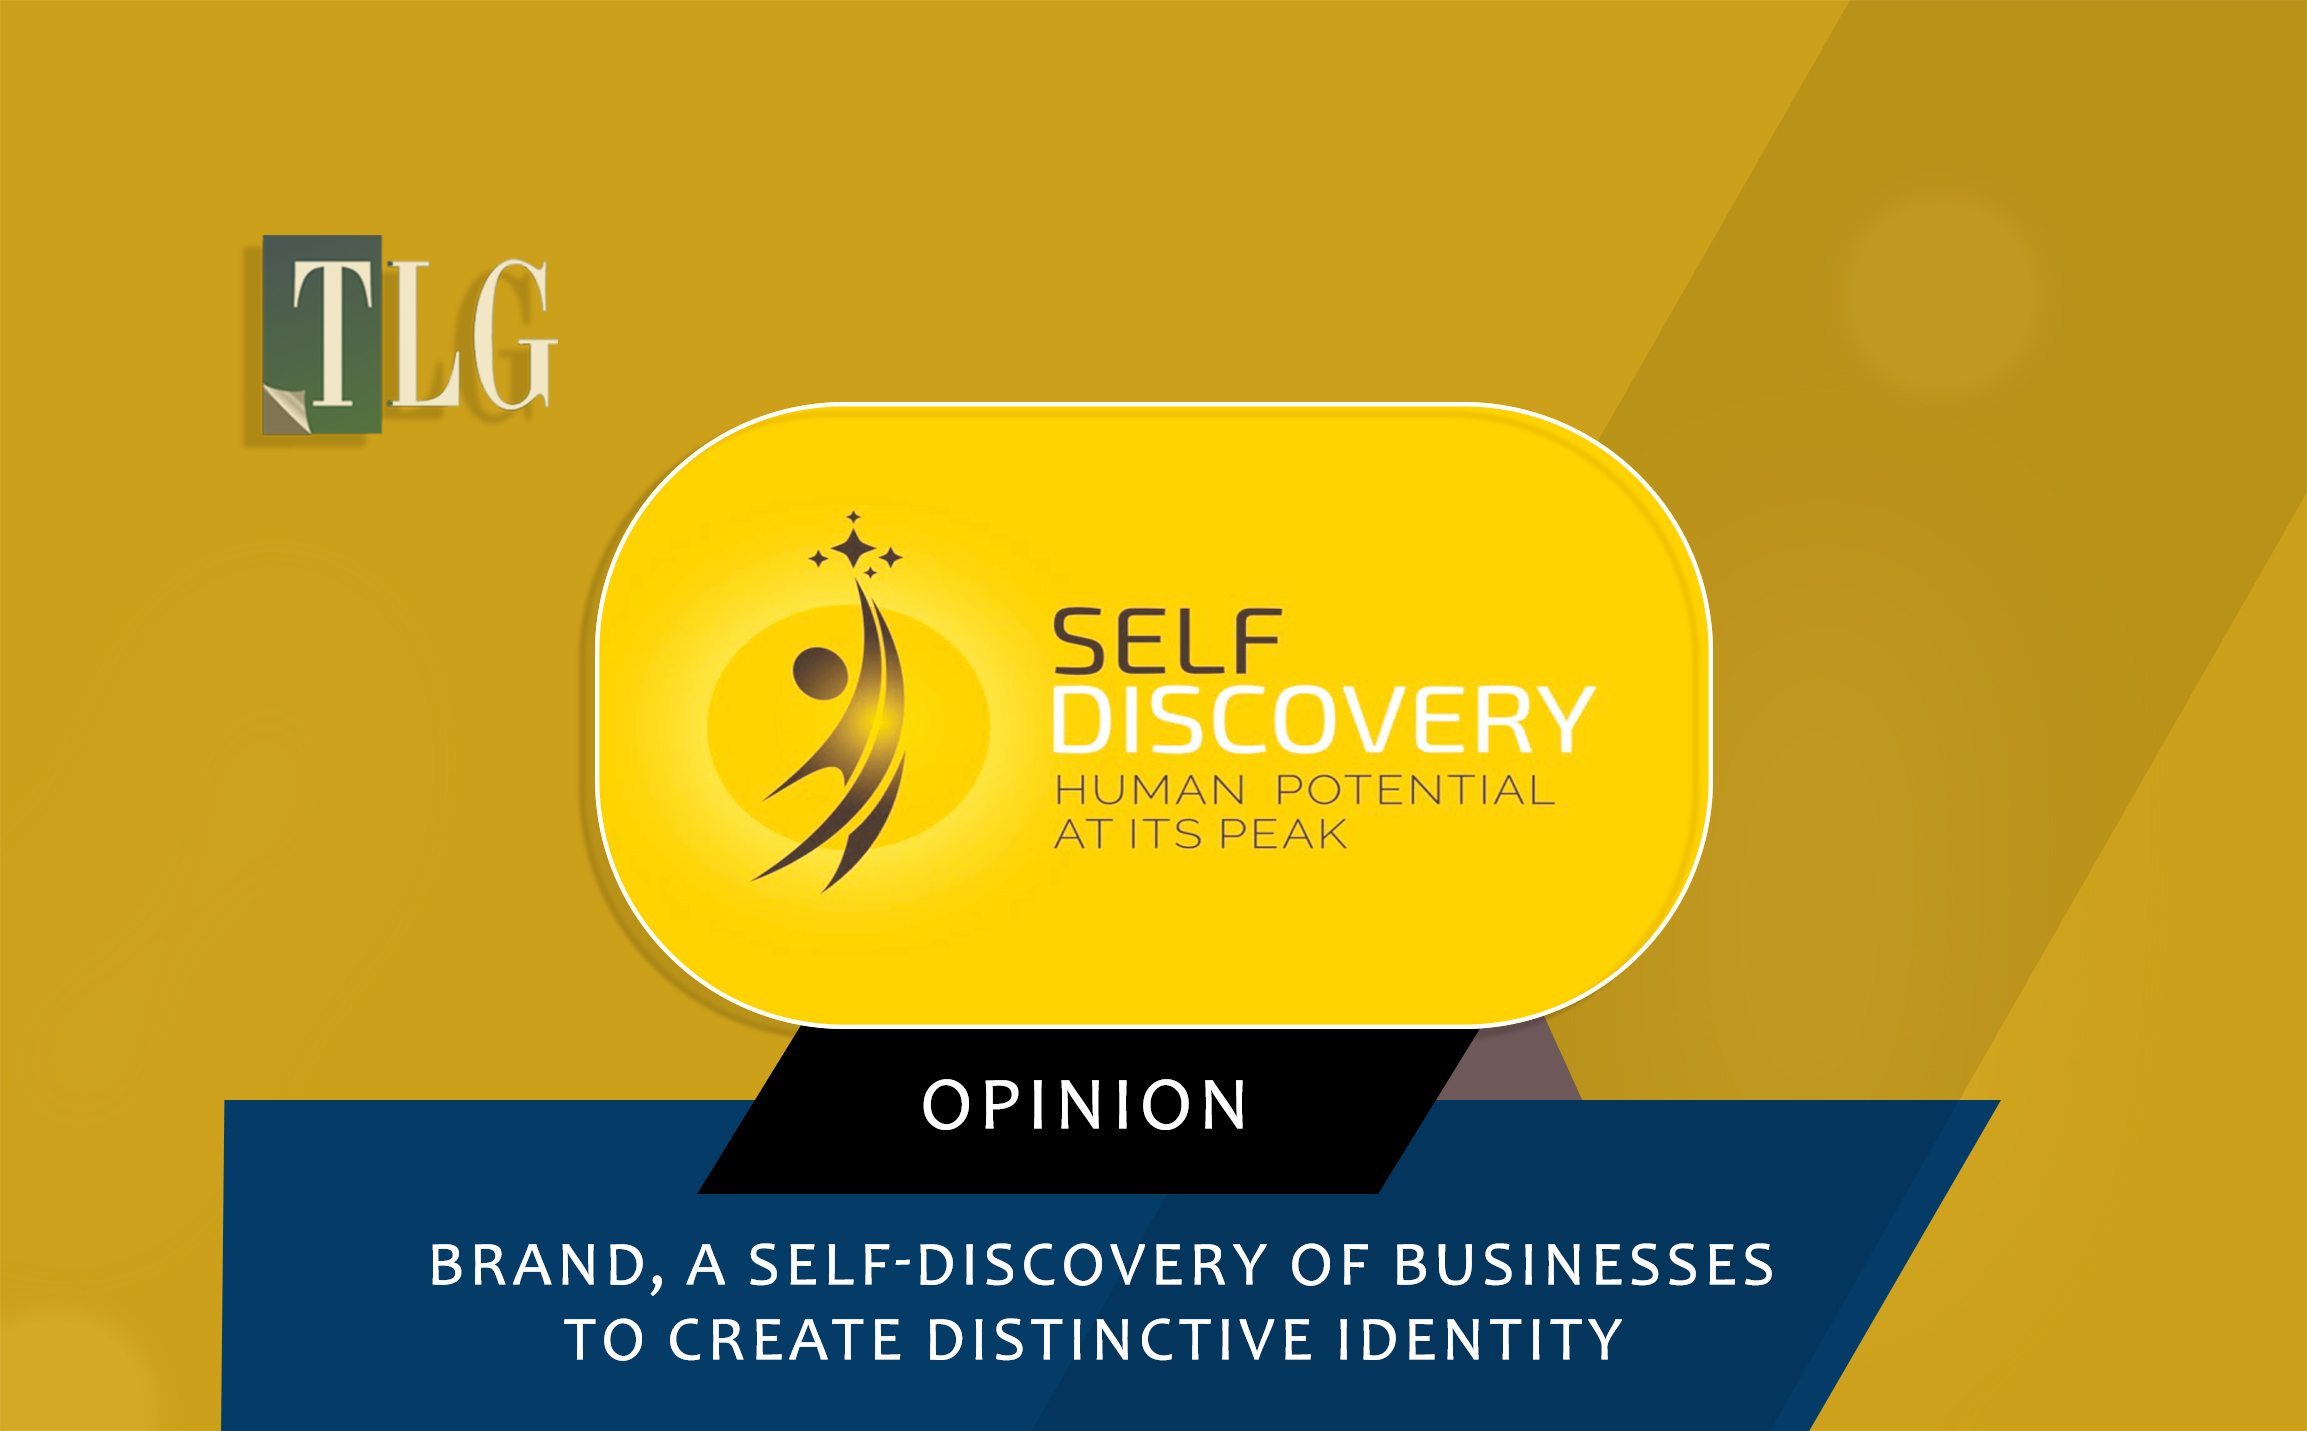 Brand, A Self-discovery of Businesses to Create Distinctive Identity